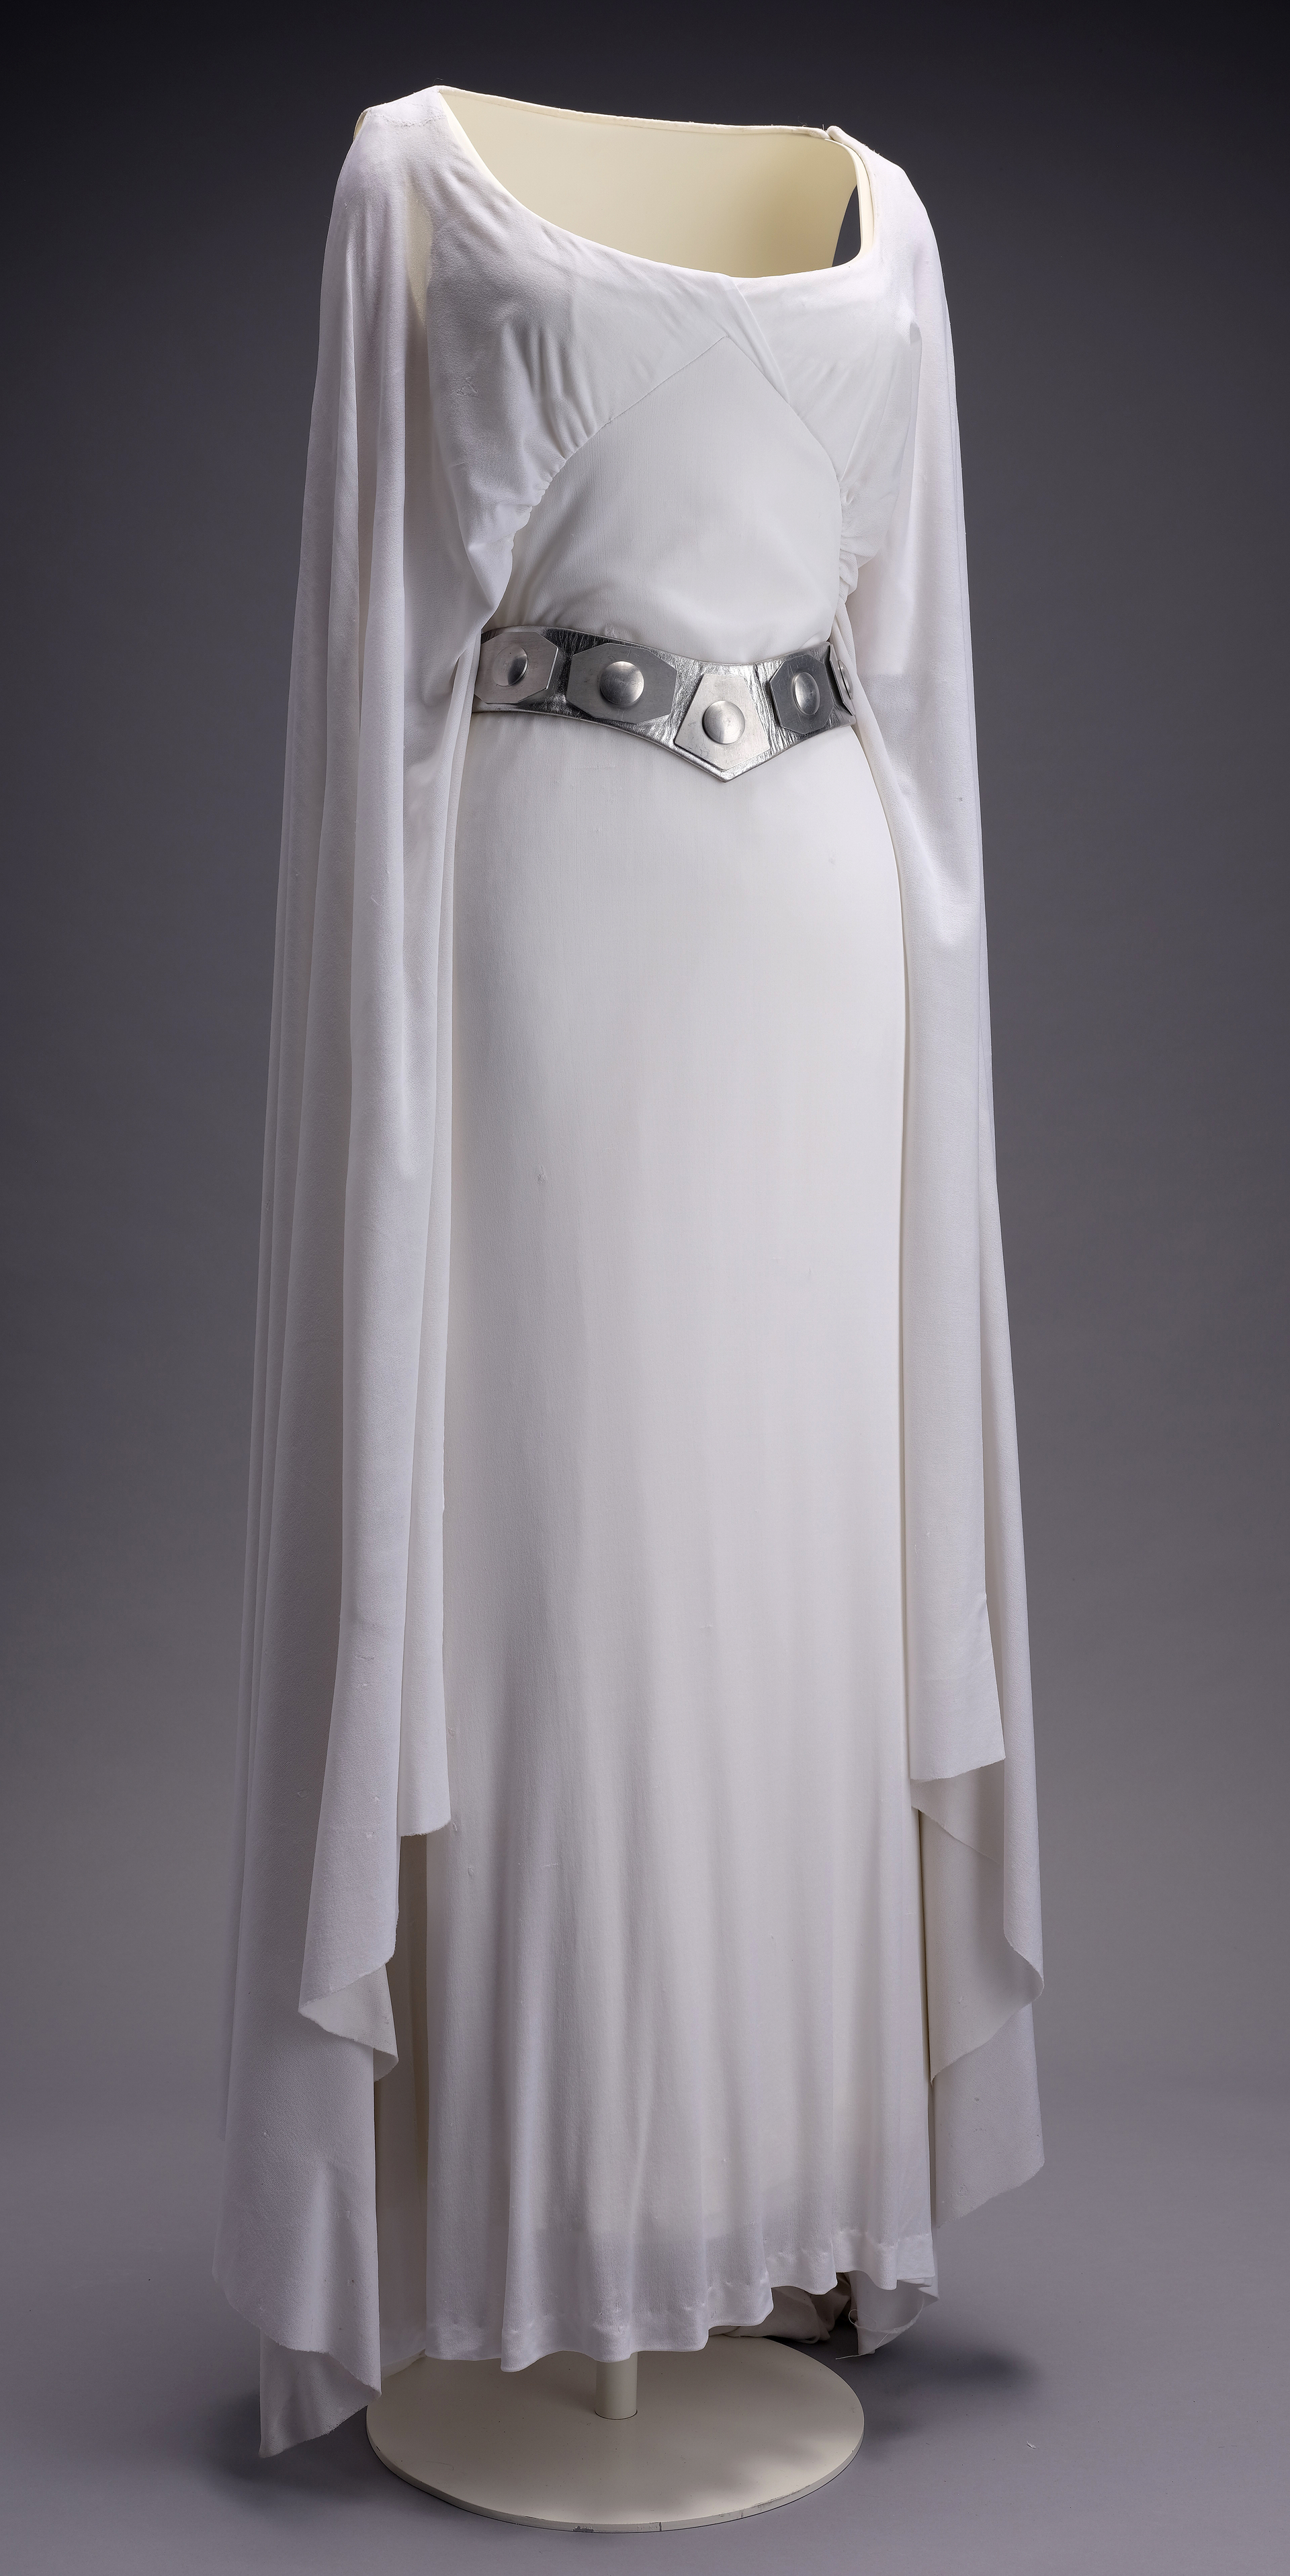 STAR WARS: A NEW HOPE (1977) - Princess Leia's (Carrie Fisher) Screen-Matched Ceremonial Dress - Image 15 of 39